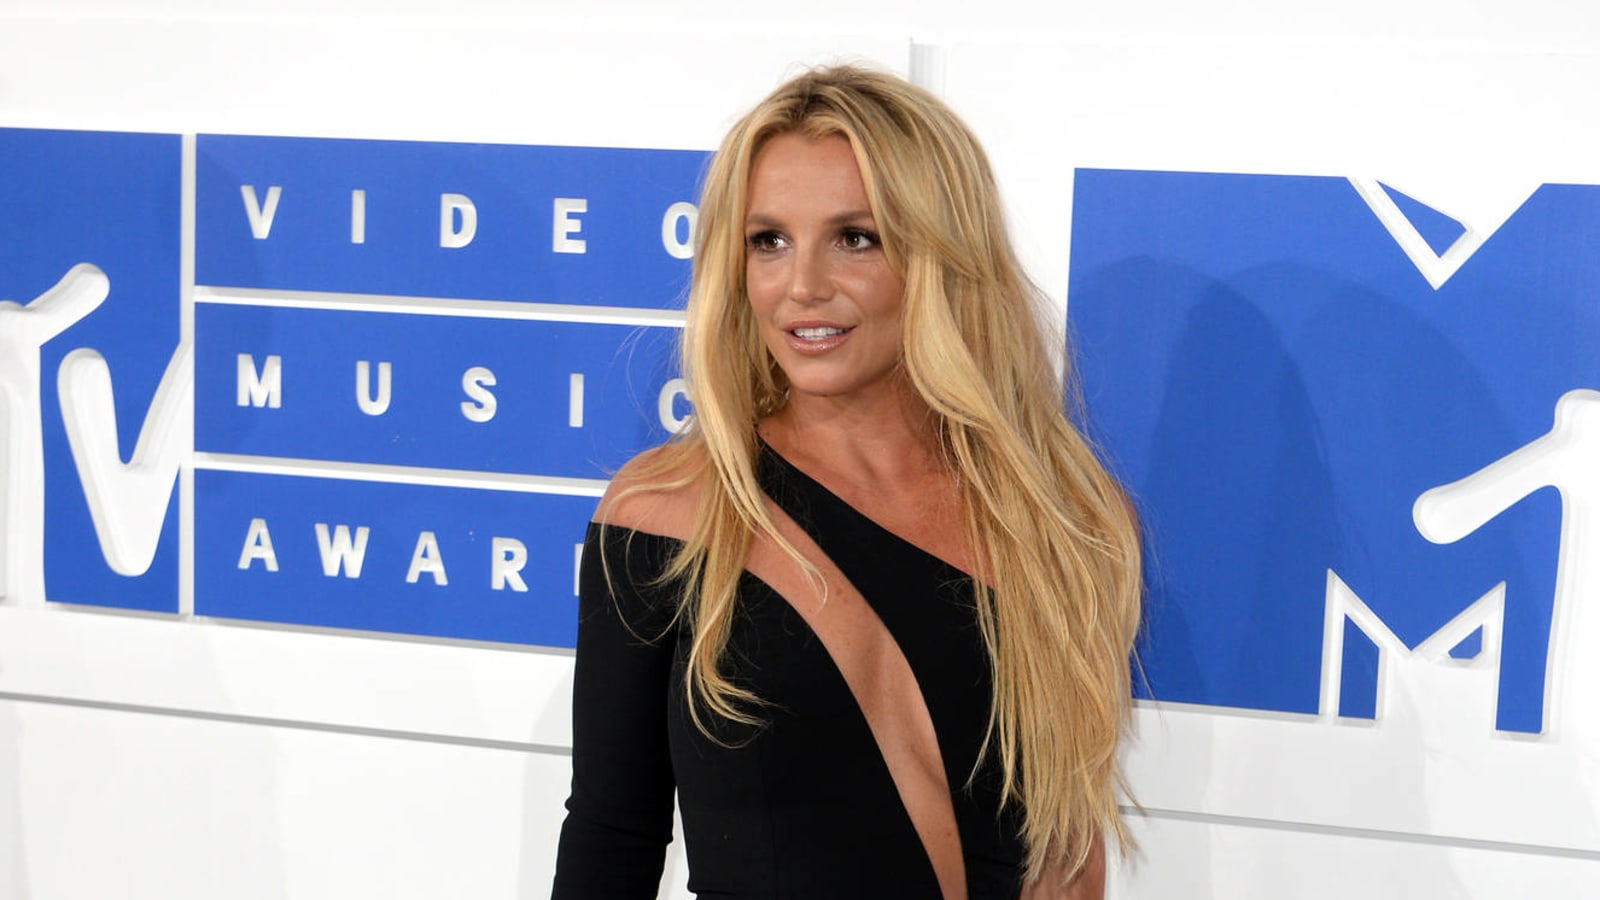 Britney Spears slams paparazzi following her in Maui: 'It's rude and it's mean'